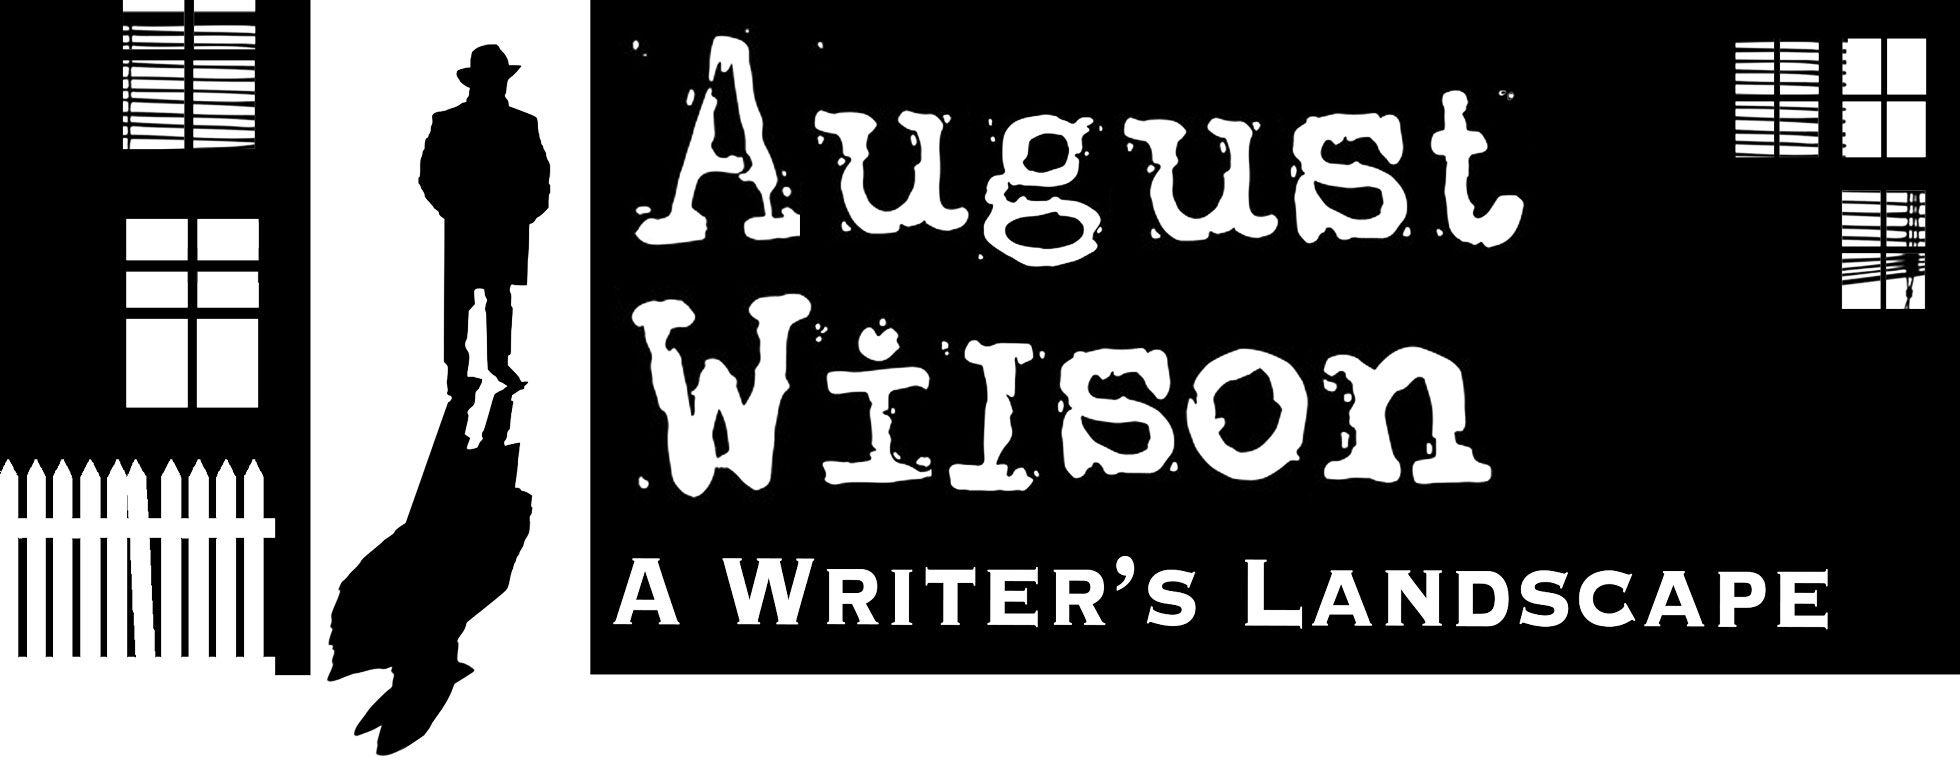 Black and white graphic for August Wilson - The Writer's Landscape